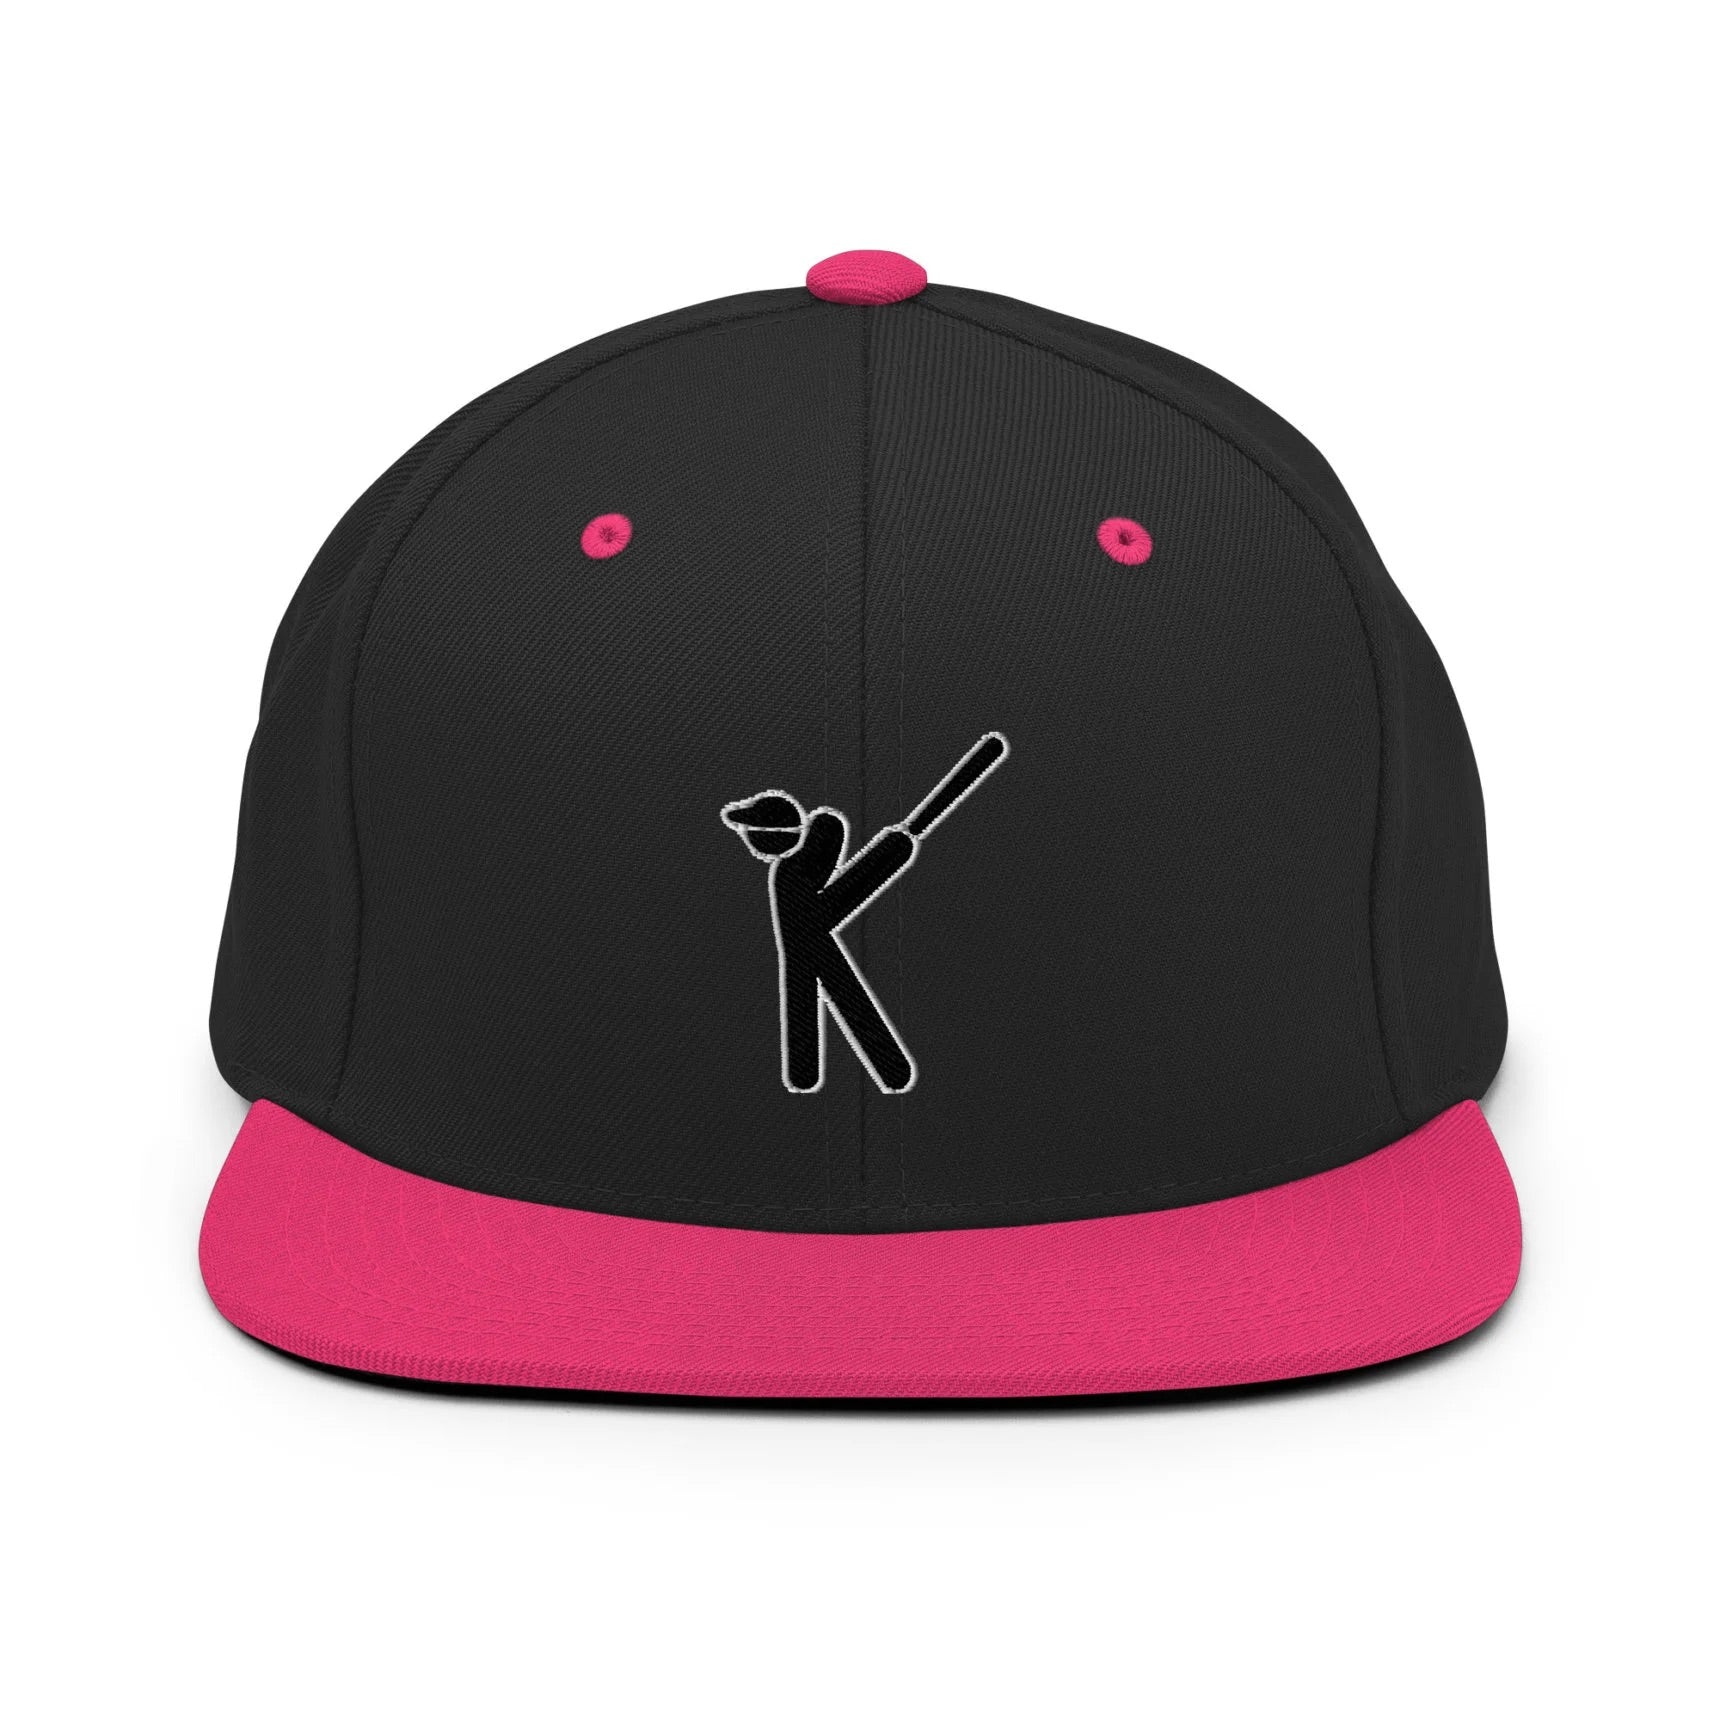 Kasabe ShowZone snapback hat in black with hot pink brim and accents